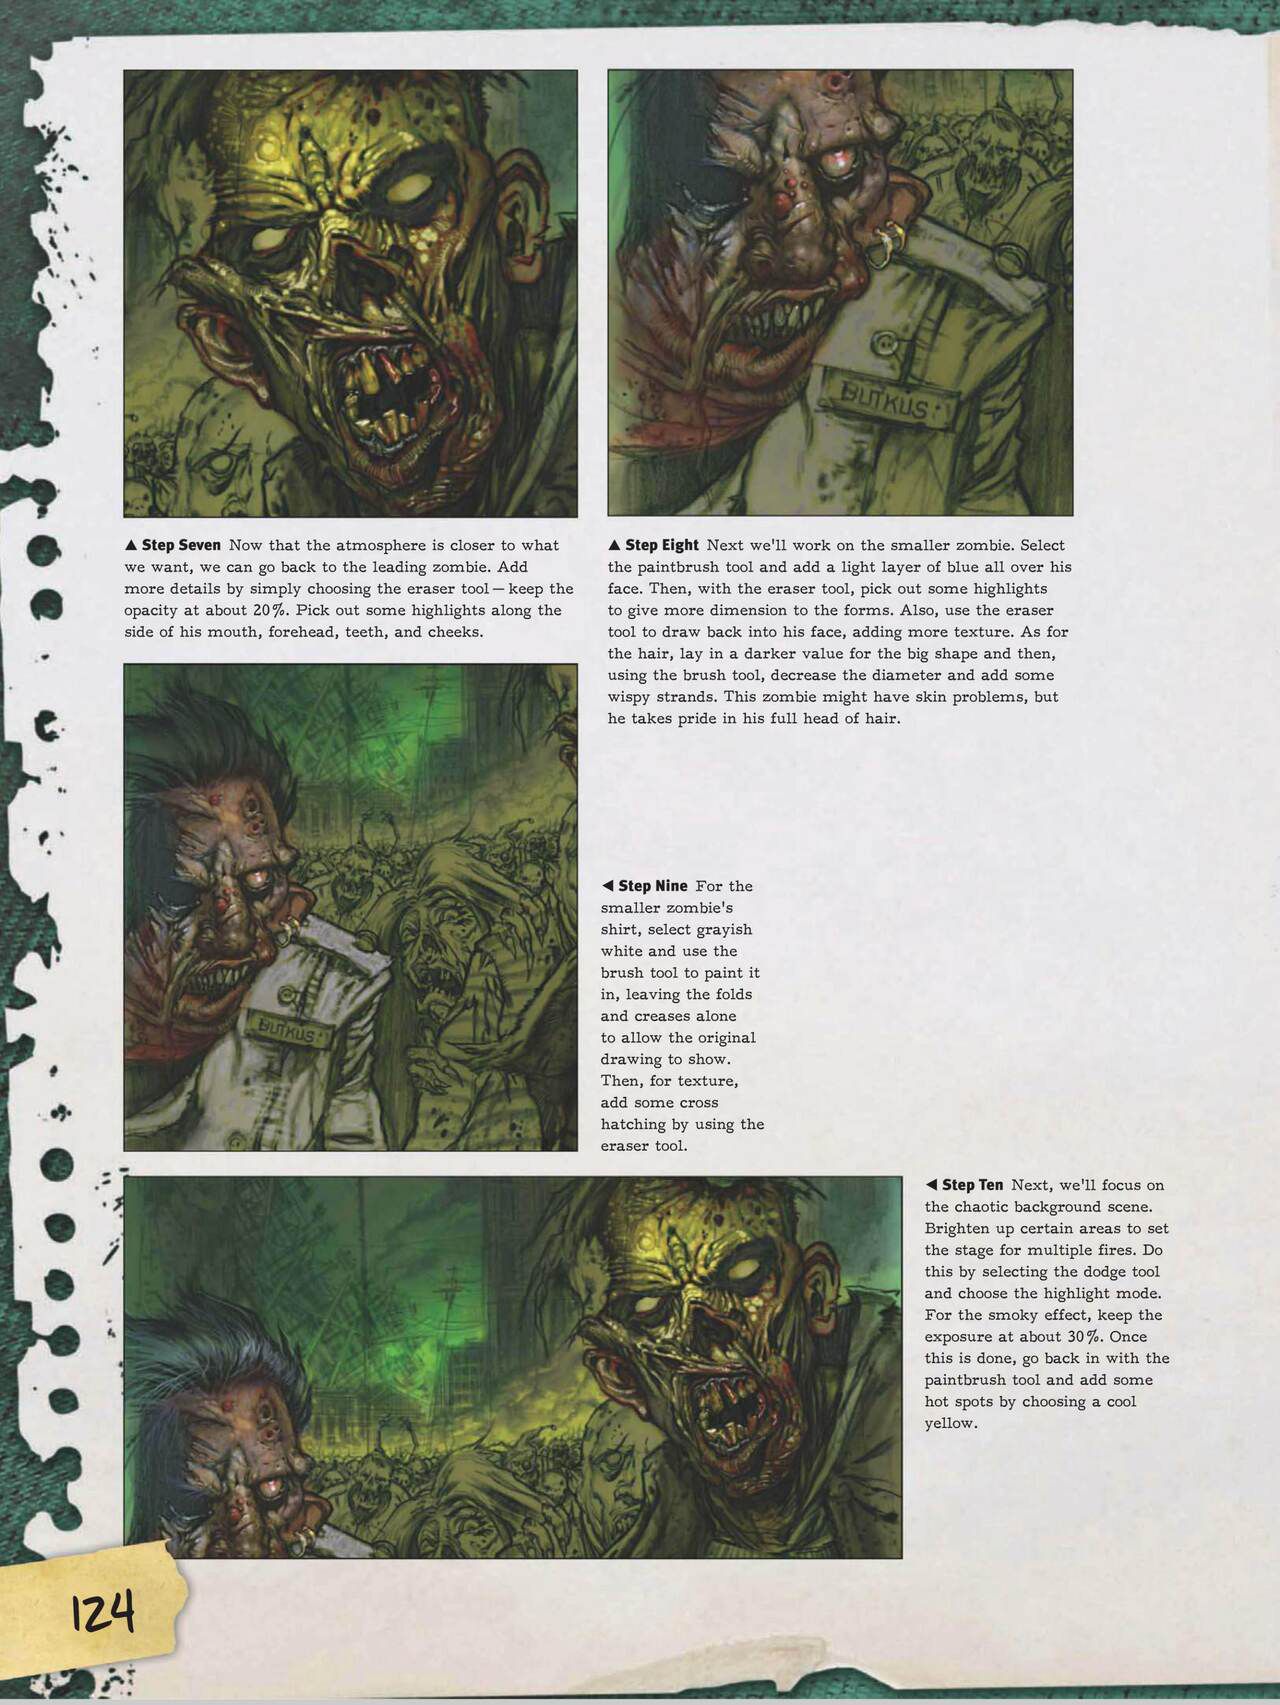 How to Draw Zombies: Discover the secrets to drawing, painting, and illustrating the undead 僵尸描绘集 125